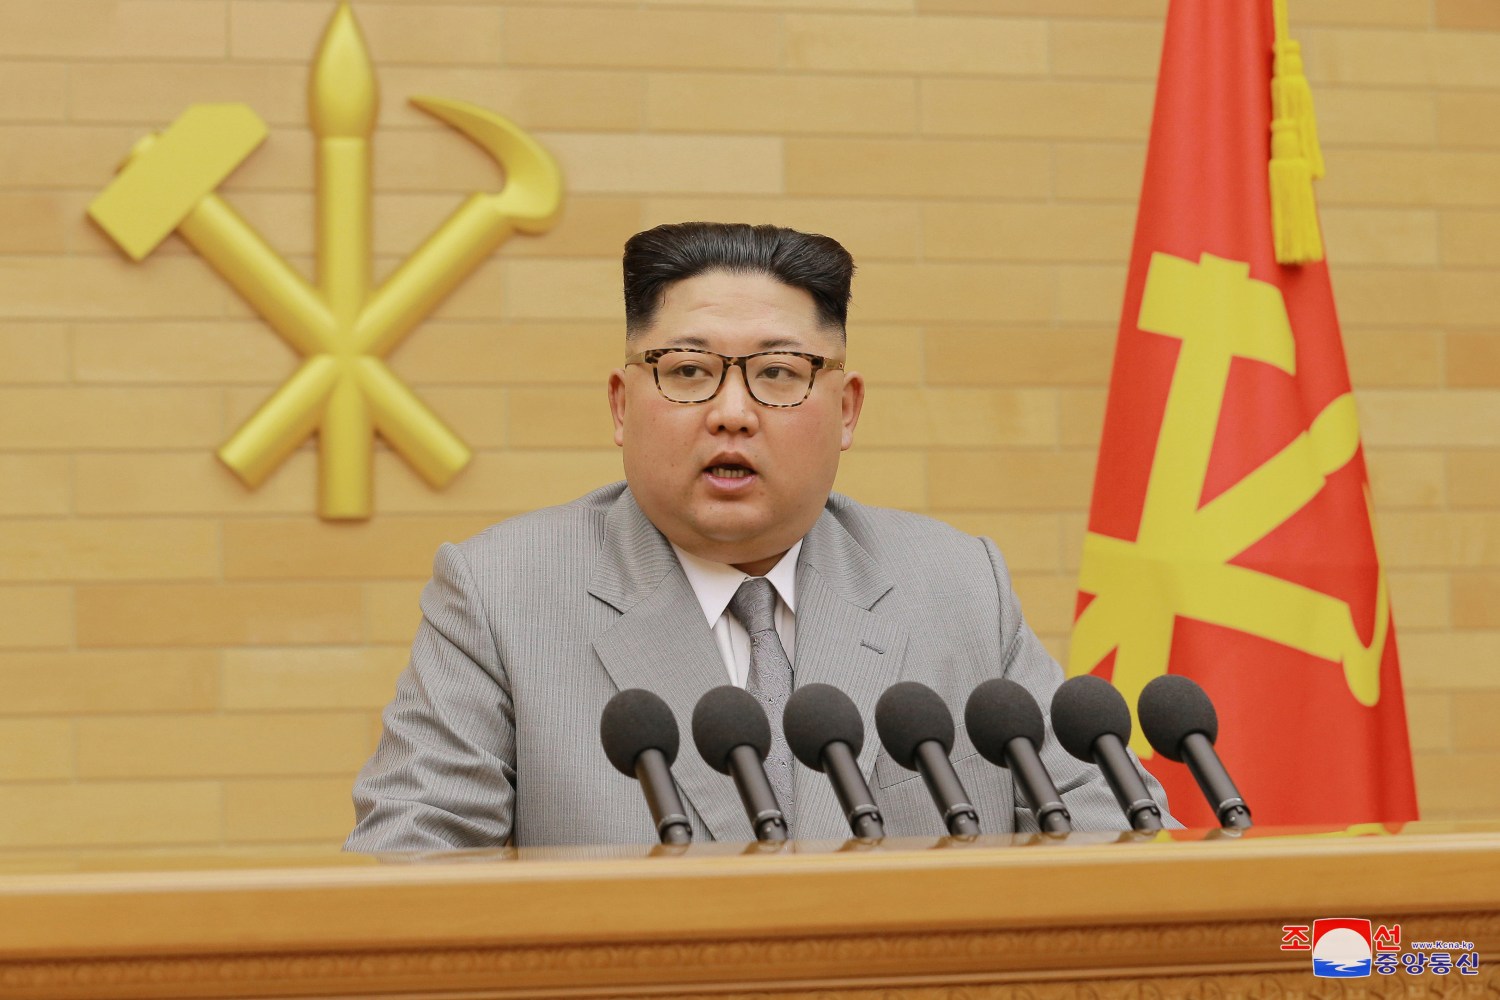 North Korea's leader Kim Jong Un speaks during a New Year's Day speech in this photo released by North Korea's Korean Central News Agency (KCNA) in Pyongyang on January 1, 2018. KCNA / via REUTERS ATTENTION EDITORS - THIS PICTURE WAS PROVIDED BY A THIRD PARTY. REUTERS IS UNABLE TO INDEPENDENTLY VERIFY THE AUTHENTICITY, CONTENT, LOCATION OR DATE OF THIS IMAGE. NO THIRD PARTY SALES. NOT FOR USE BY REUTERS THIRD PARTY DISTRIBUTORS. SOUTH KOREA OUT. - RC110B5BCDC0